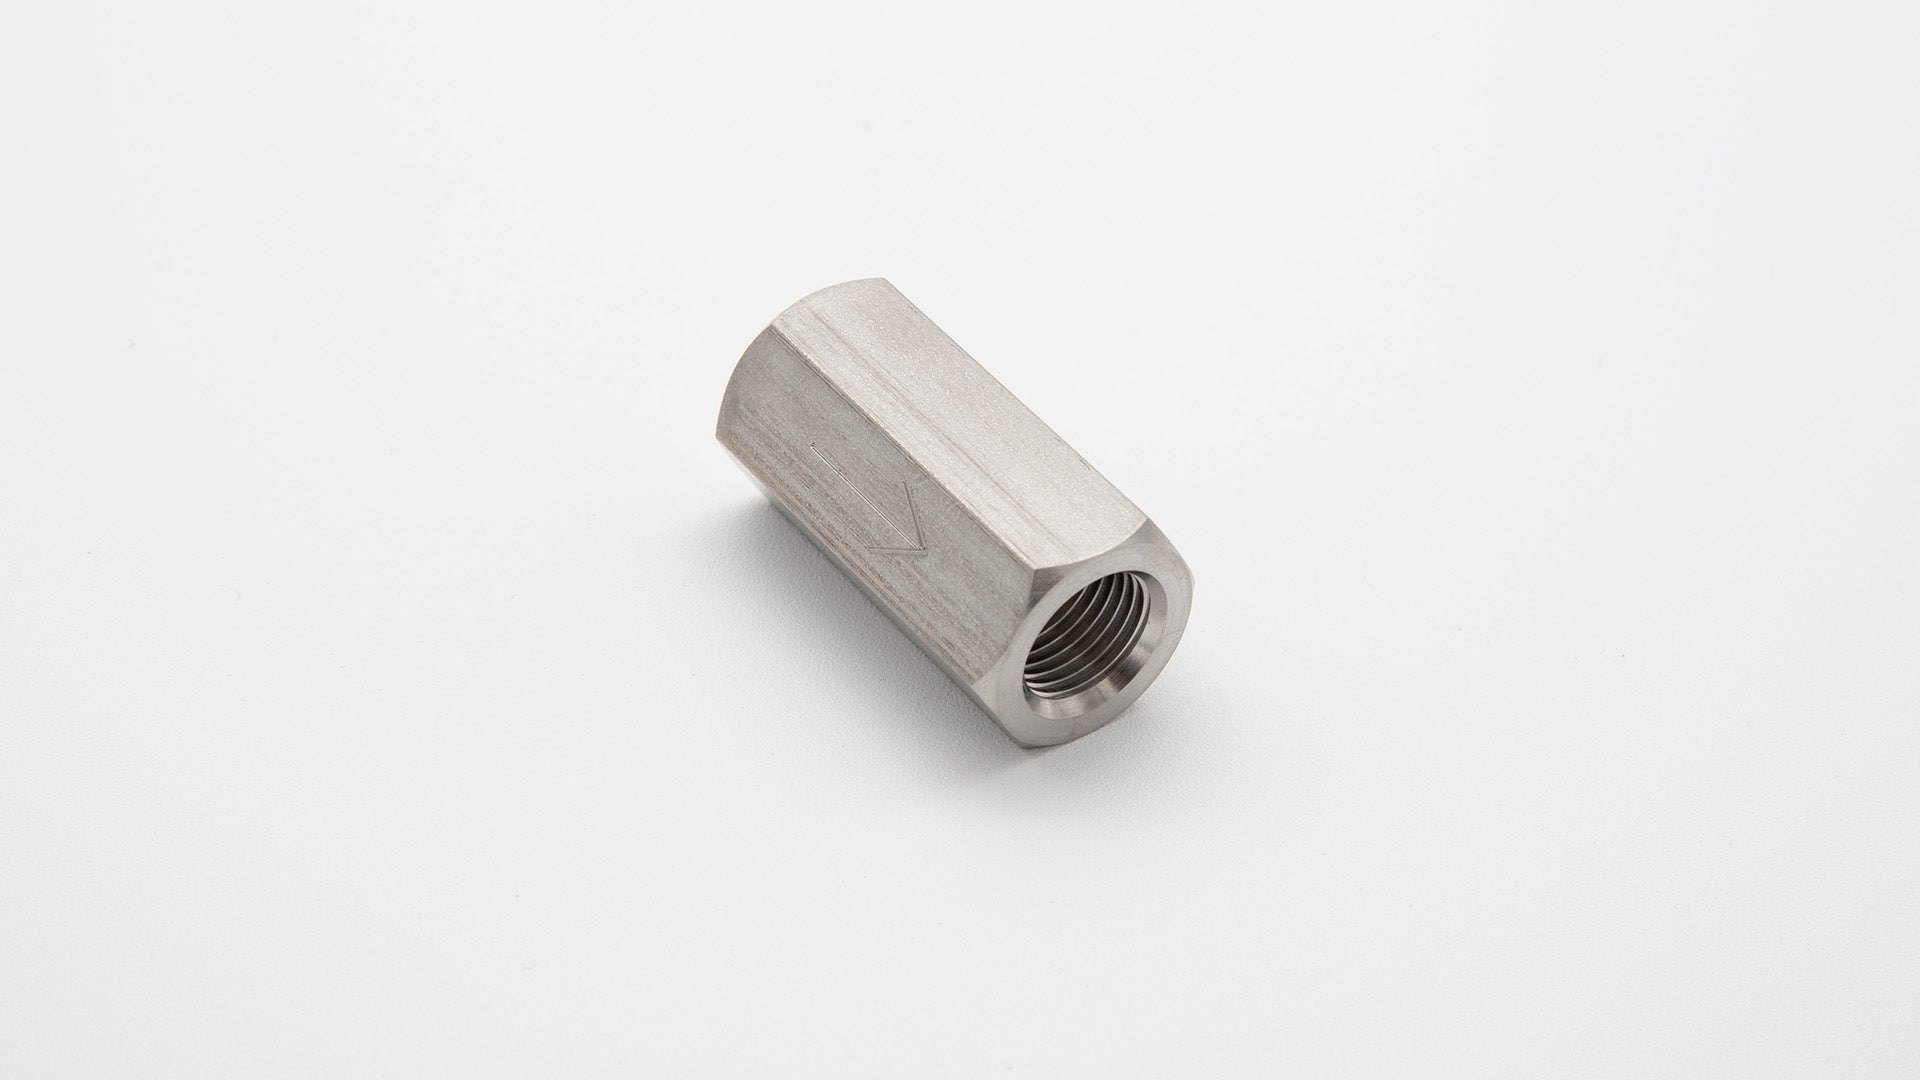 Cylinder with threaded hole in center.